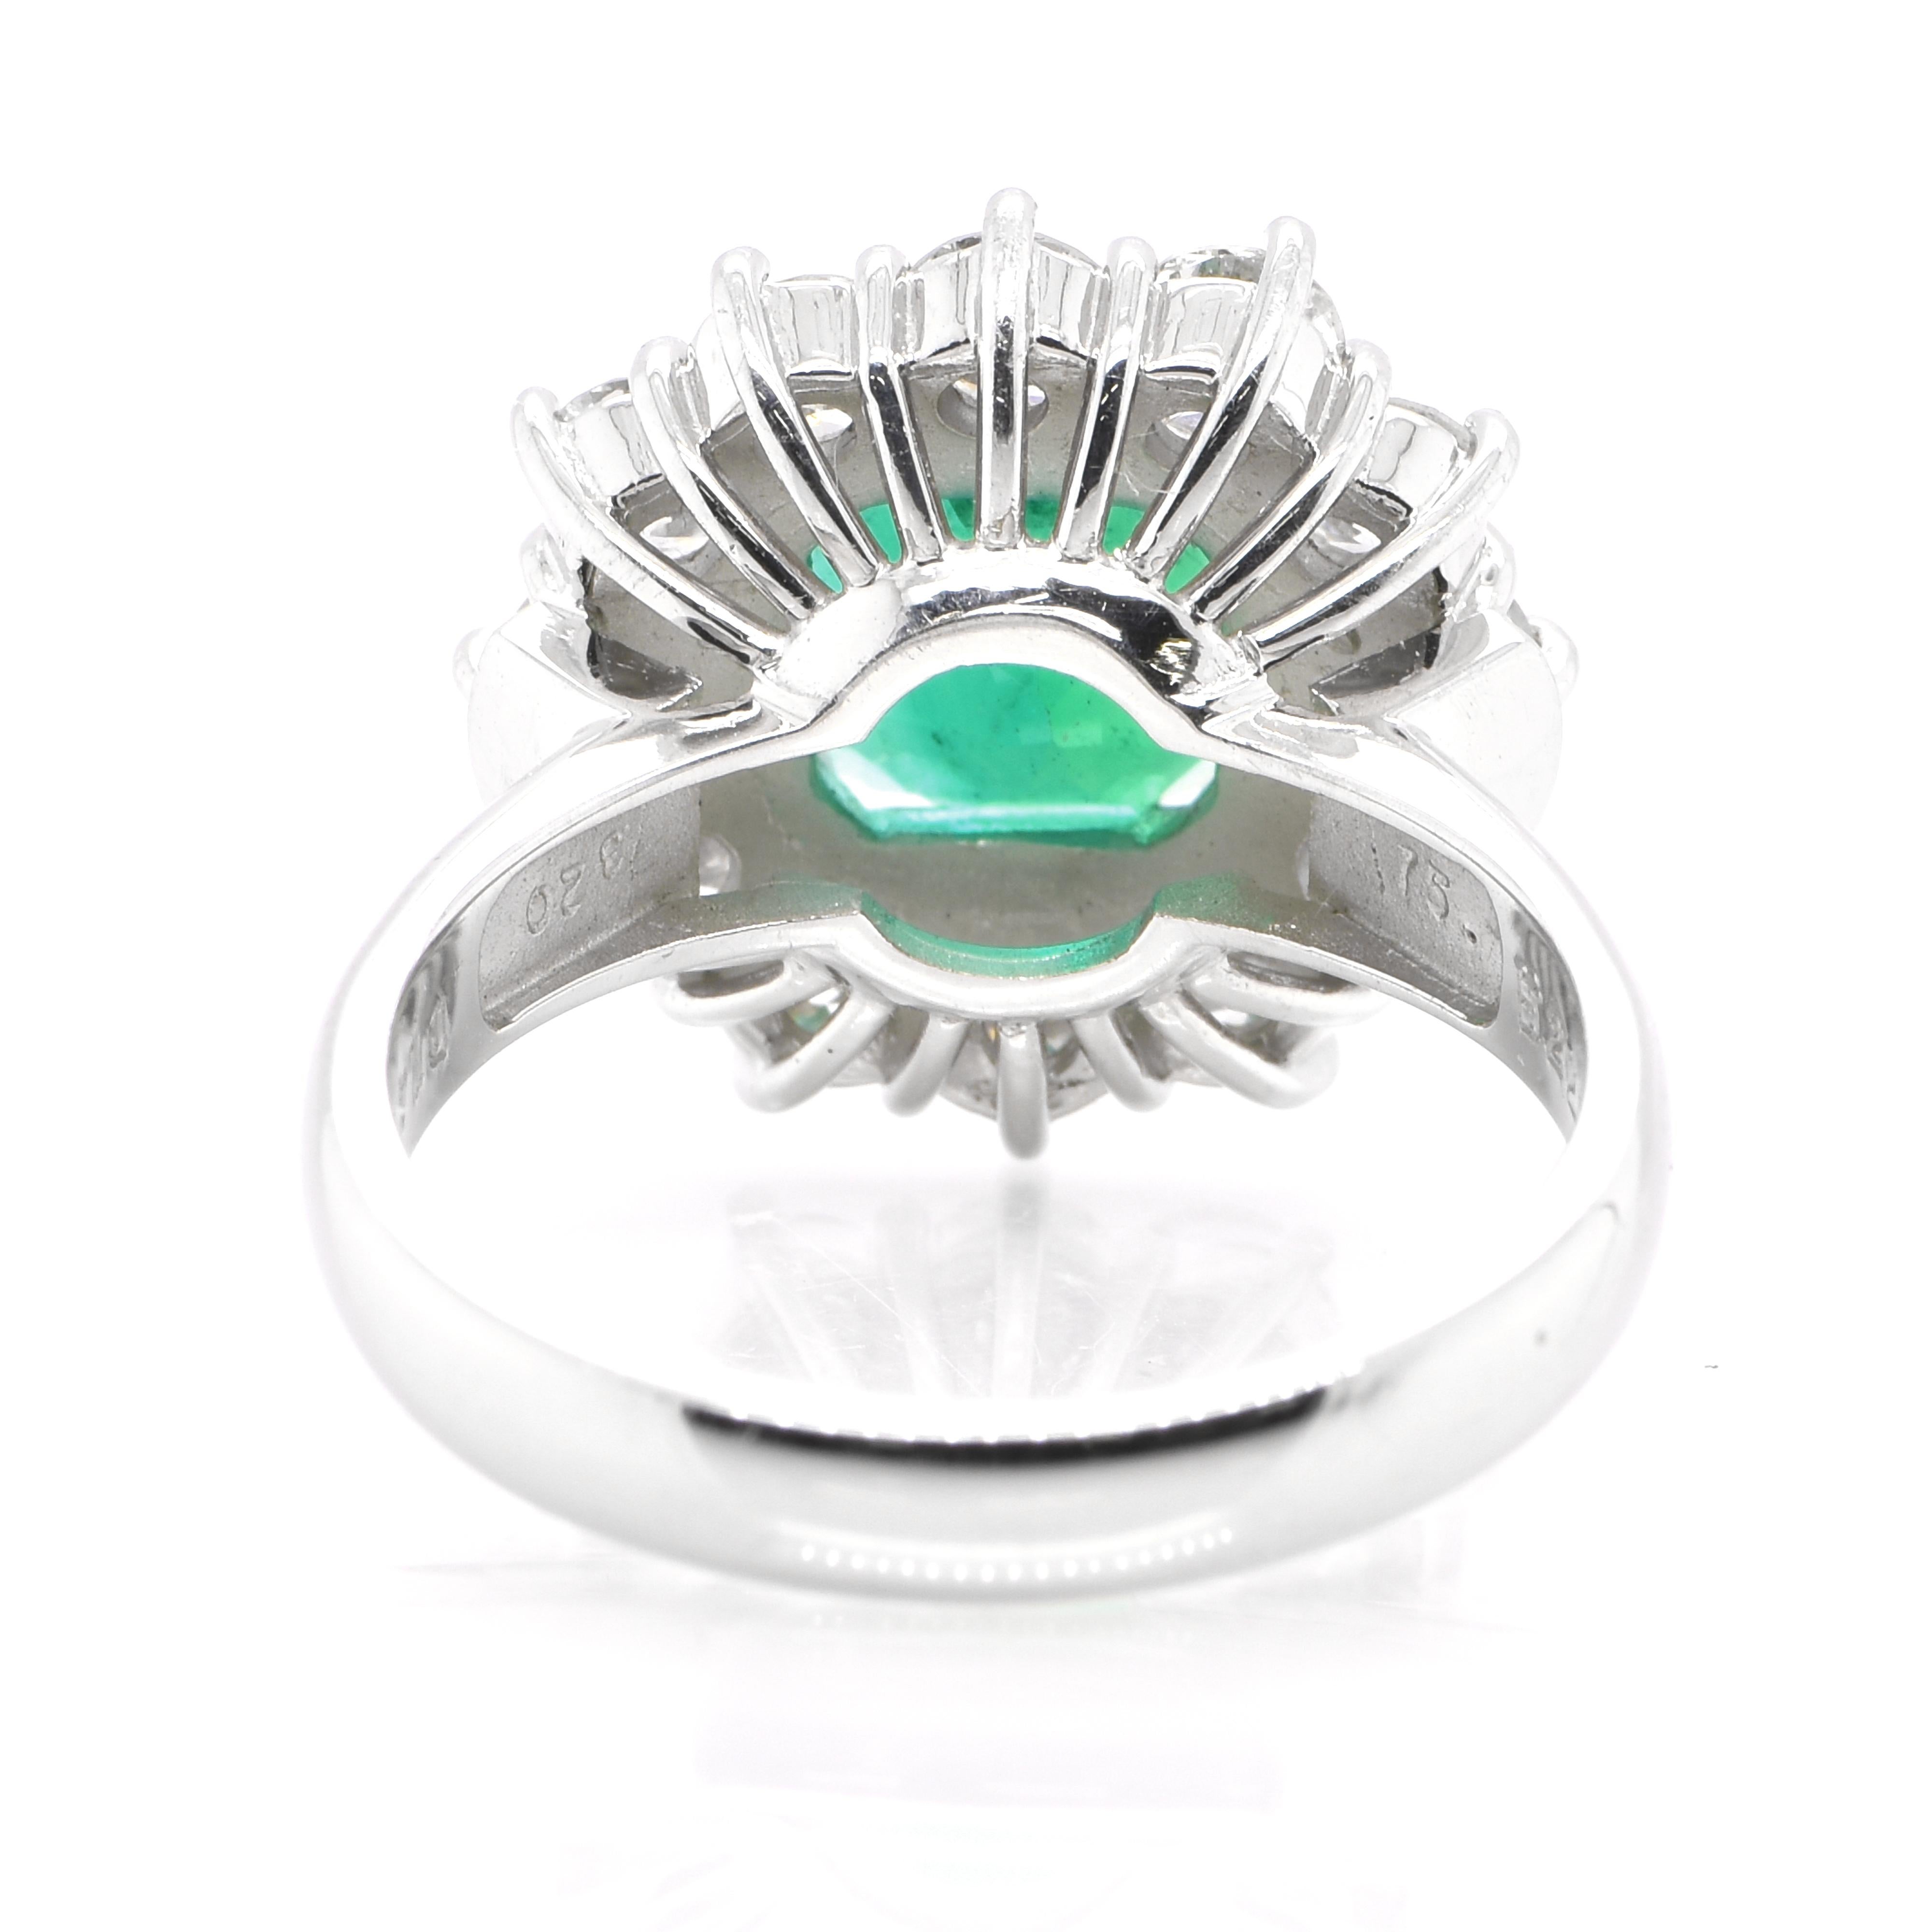 Women's GIA Certified 2.21 Carat Natural Emerald and Diamond Halo Ring Set in Platinum